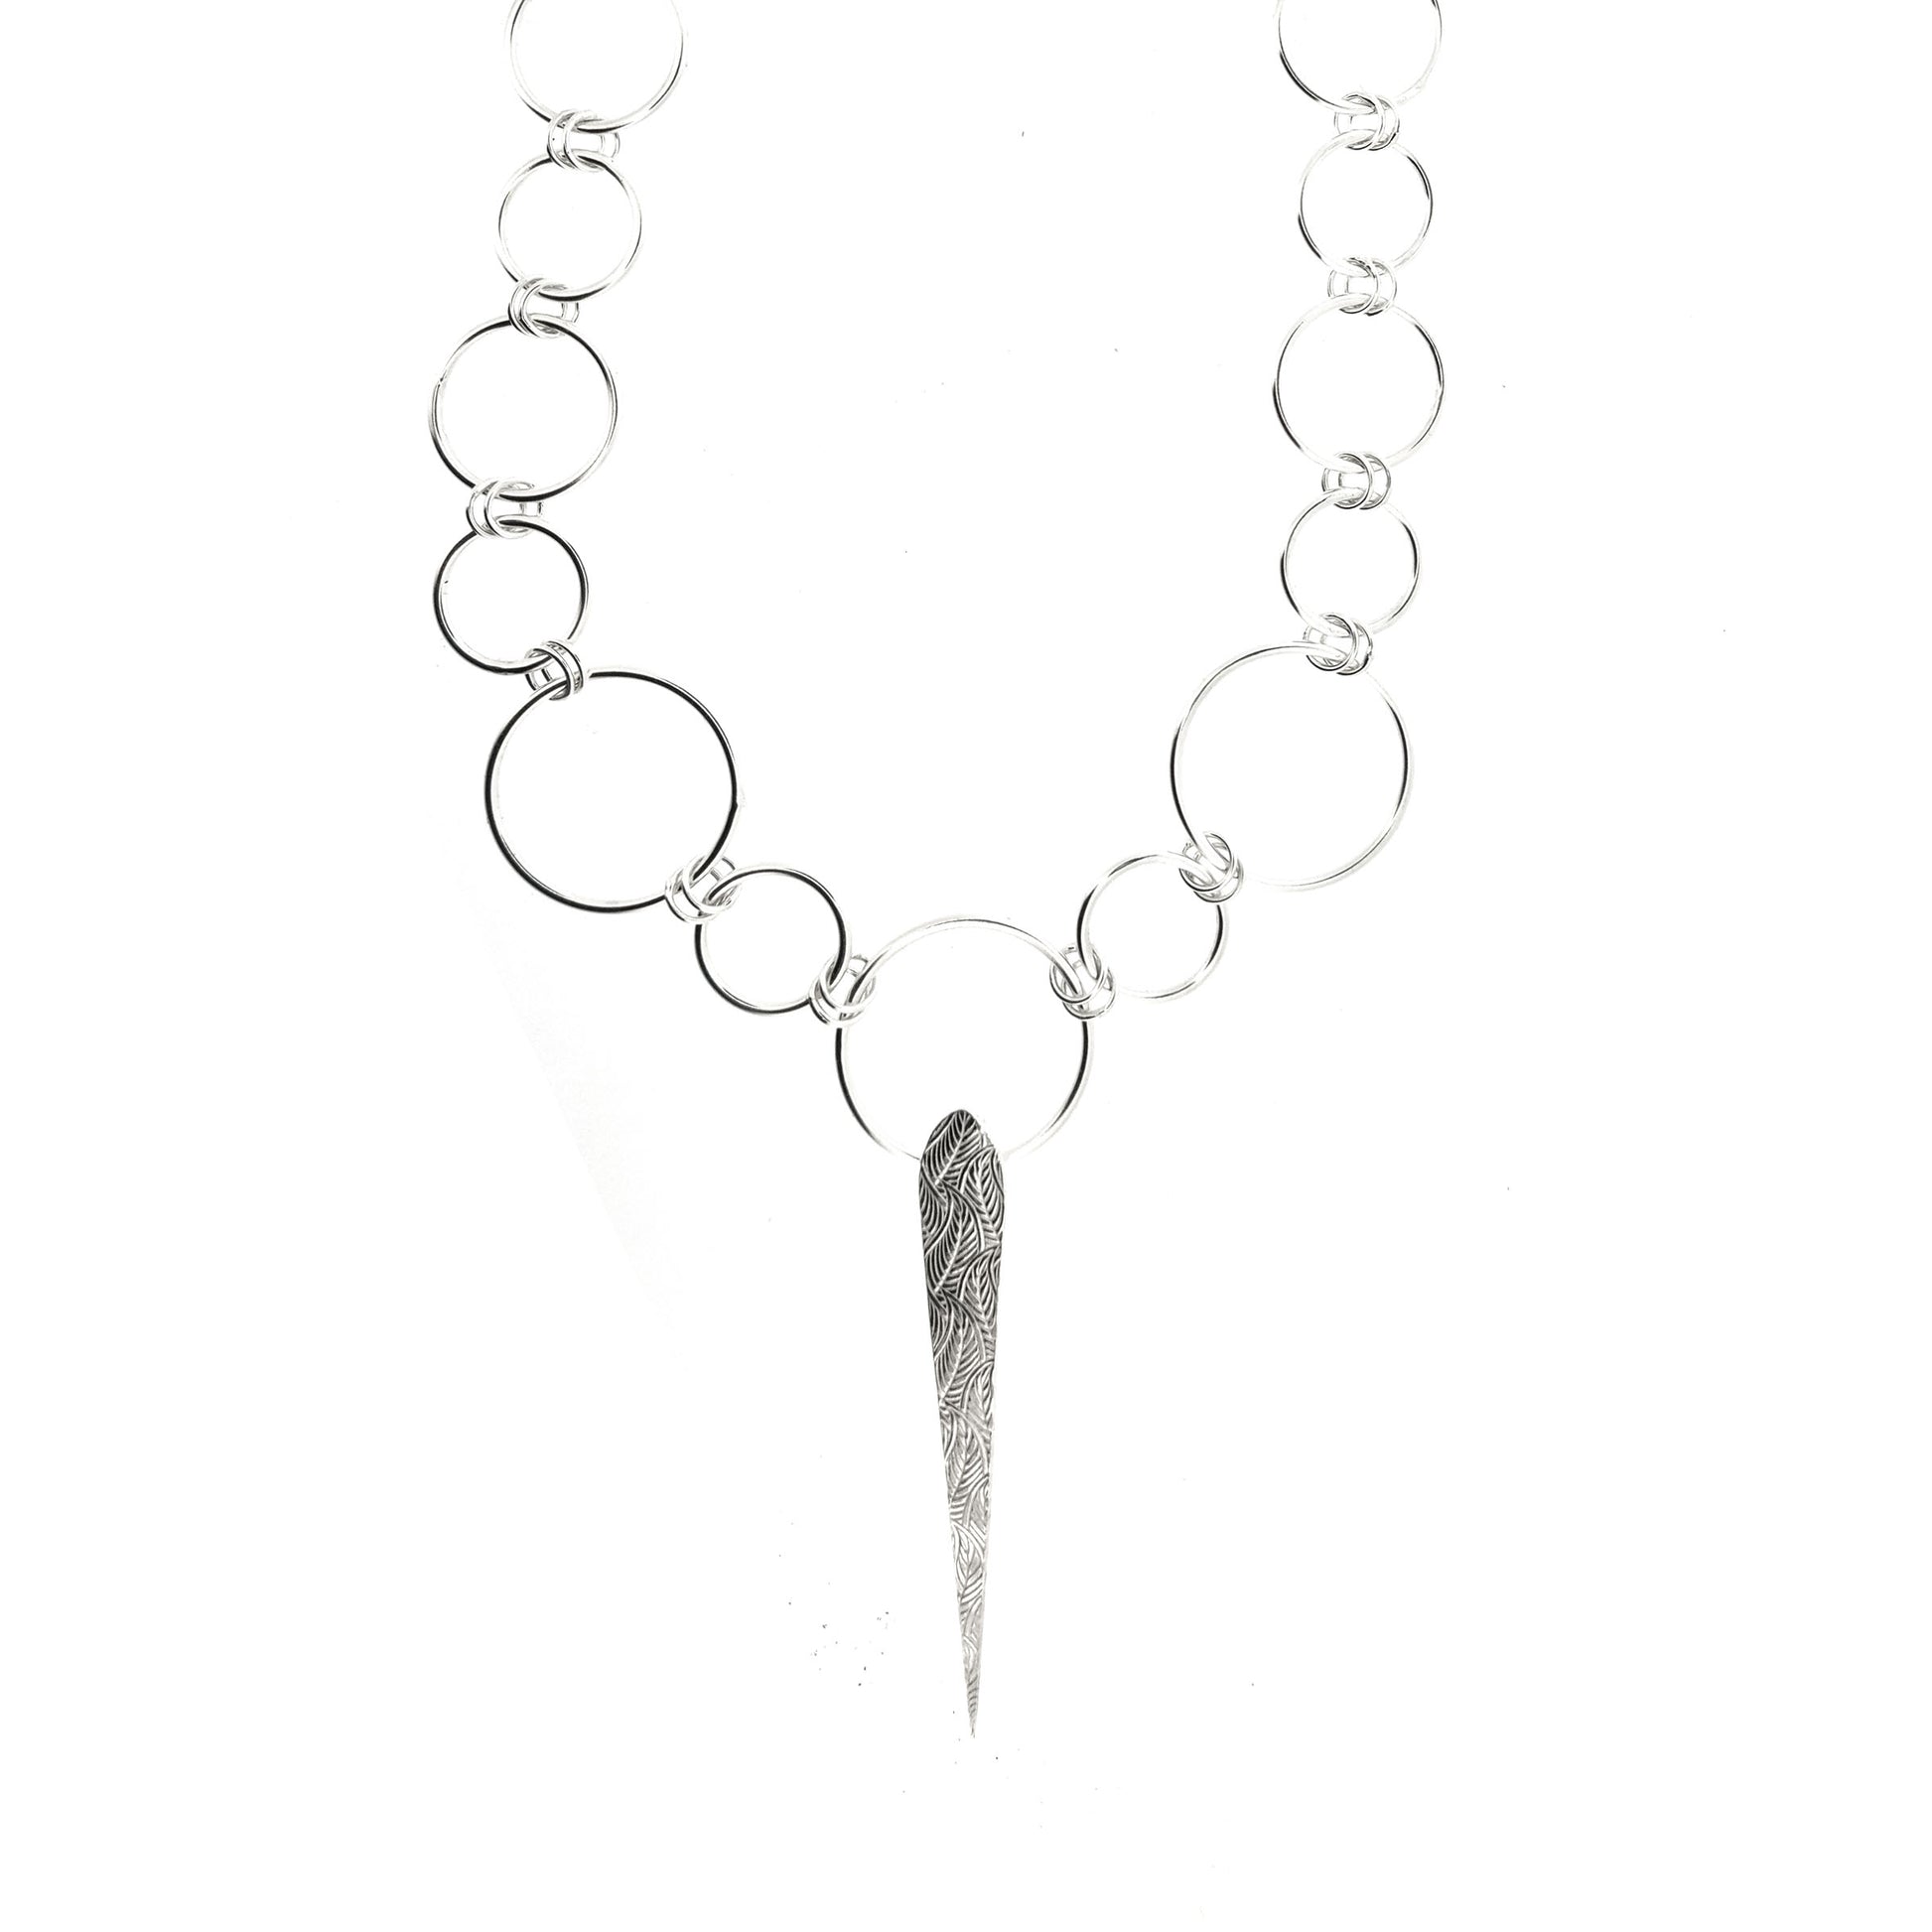 Silver elongated patterned teardrop pendant on a handmade circle link chain with circles of differing sizes.